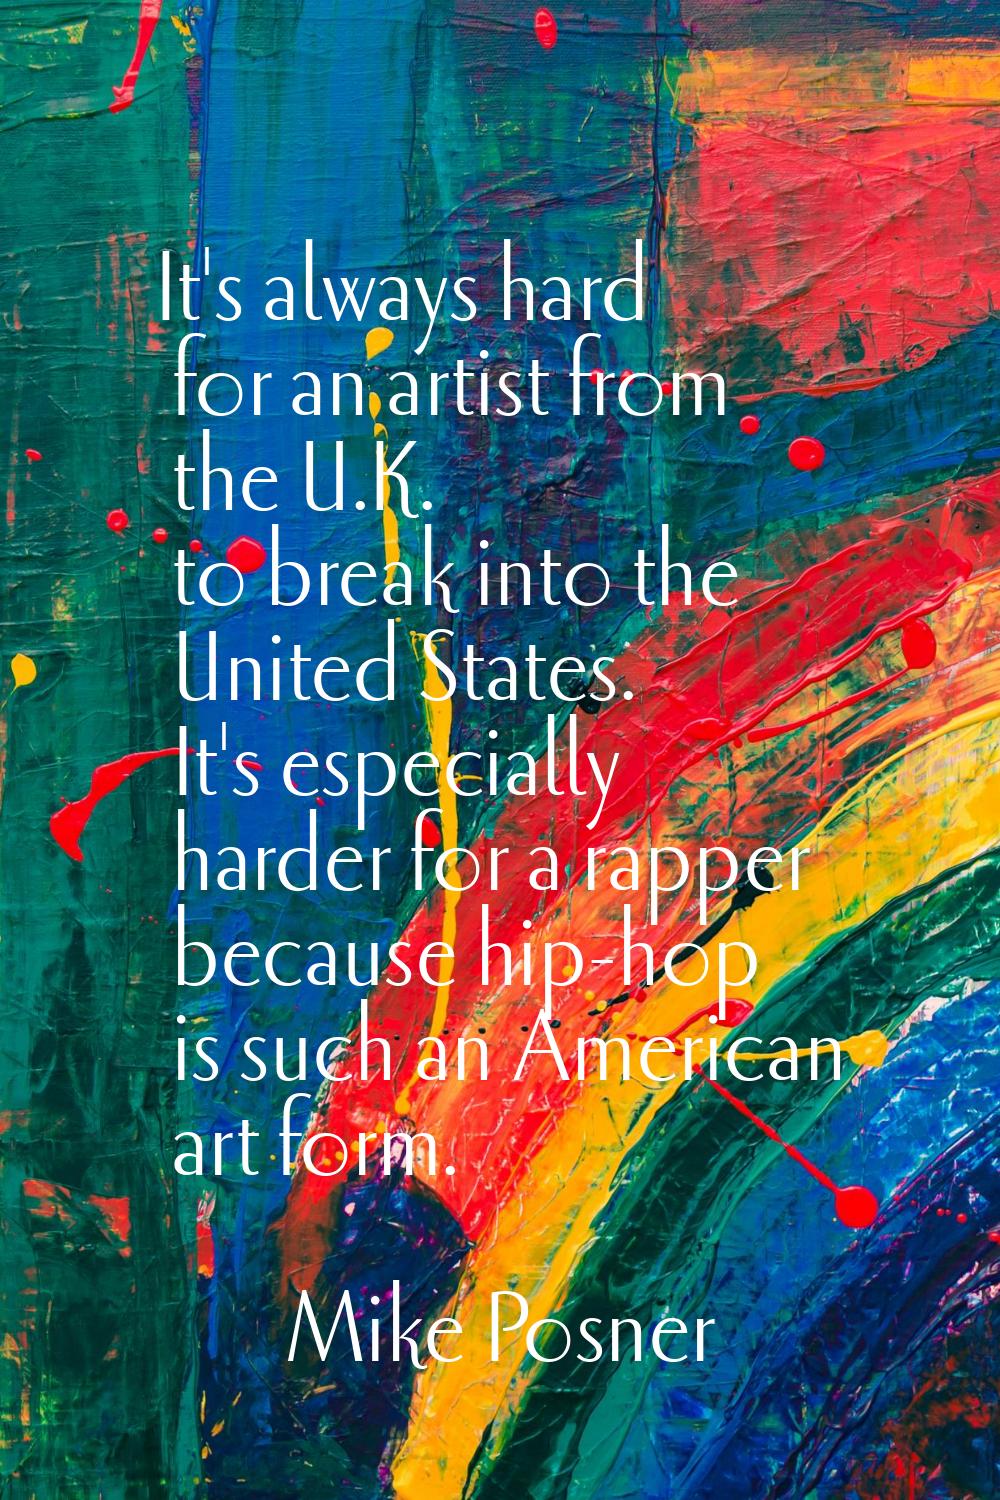 It's always hard for an artist from the U.K. to break into the United States. It's especially harde